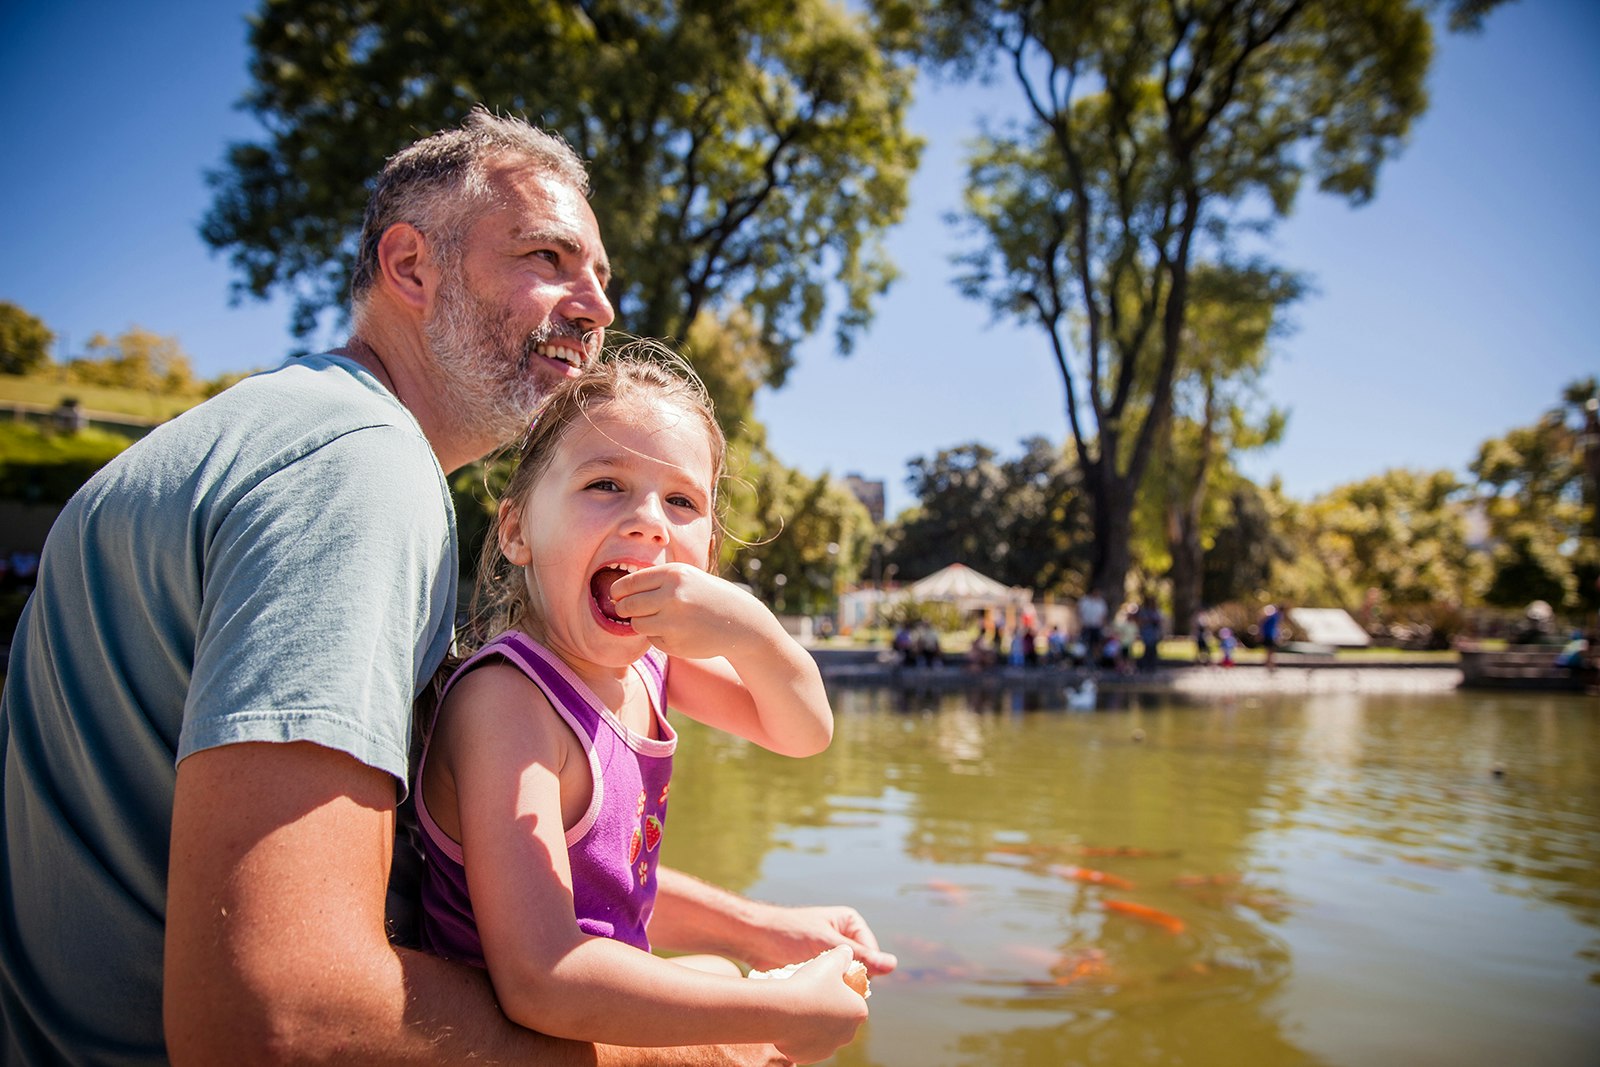 A father and daughter sit next to a pond with koi fish in it at Parque Centenario in Buenos Aires, Argentina